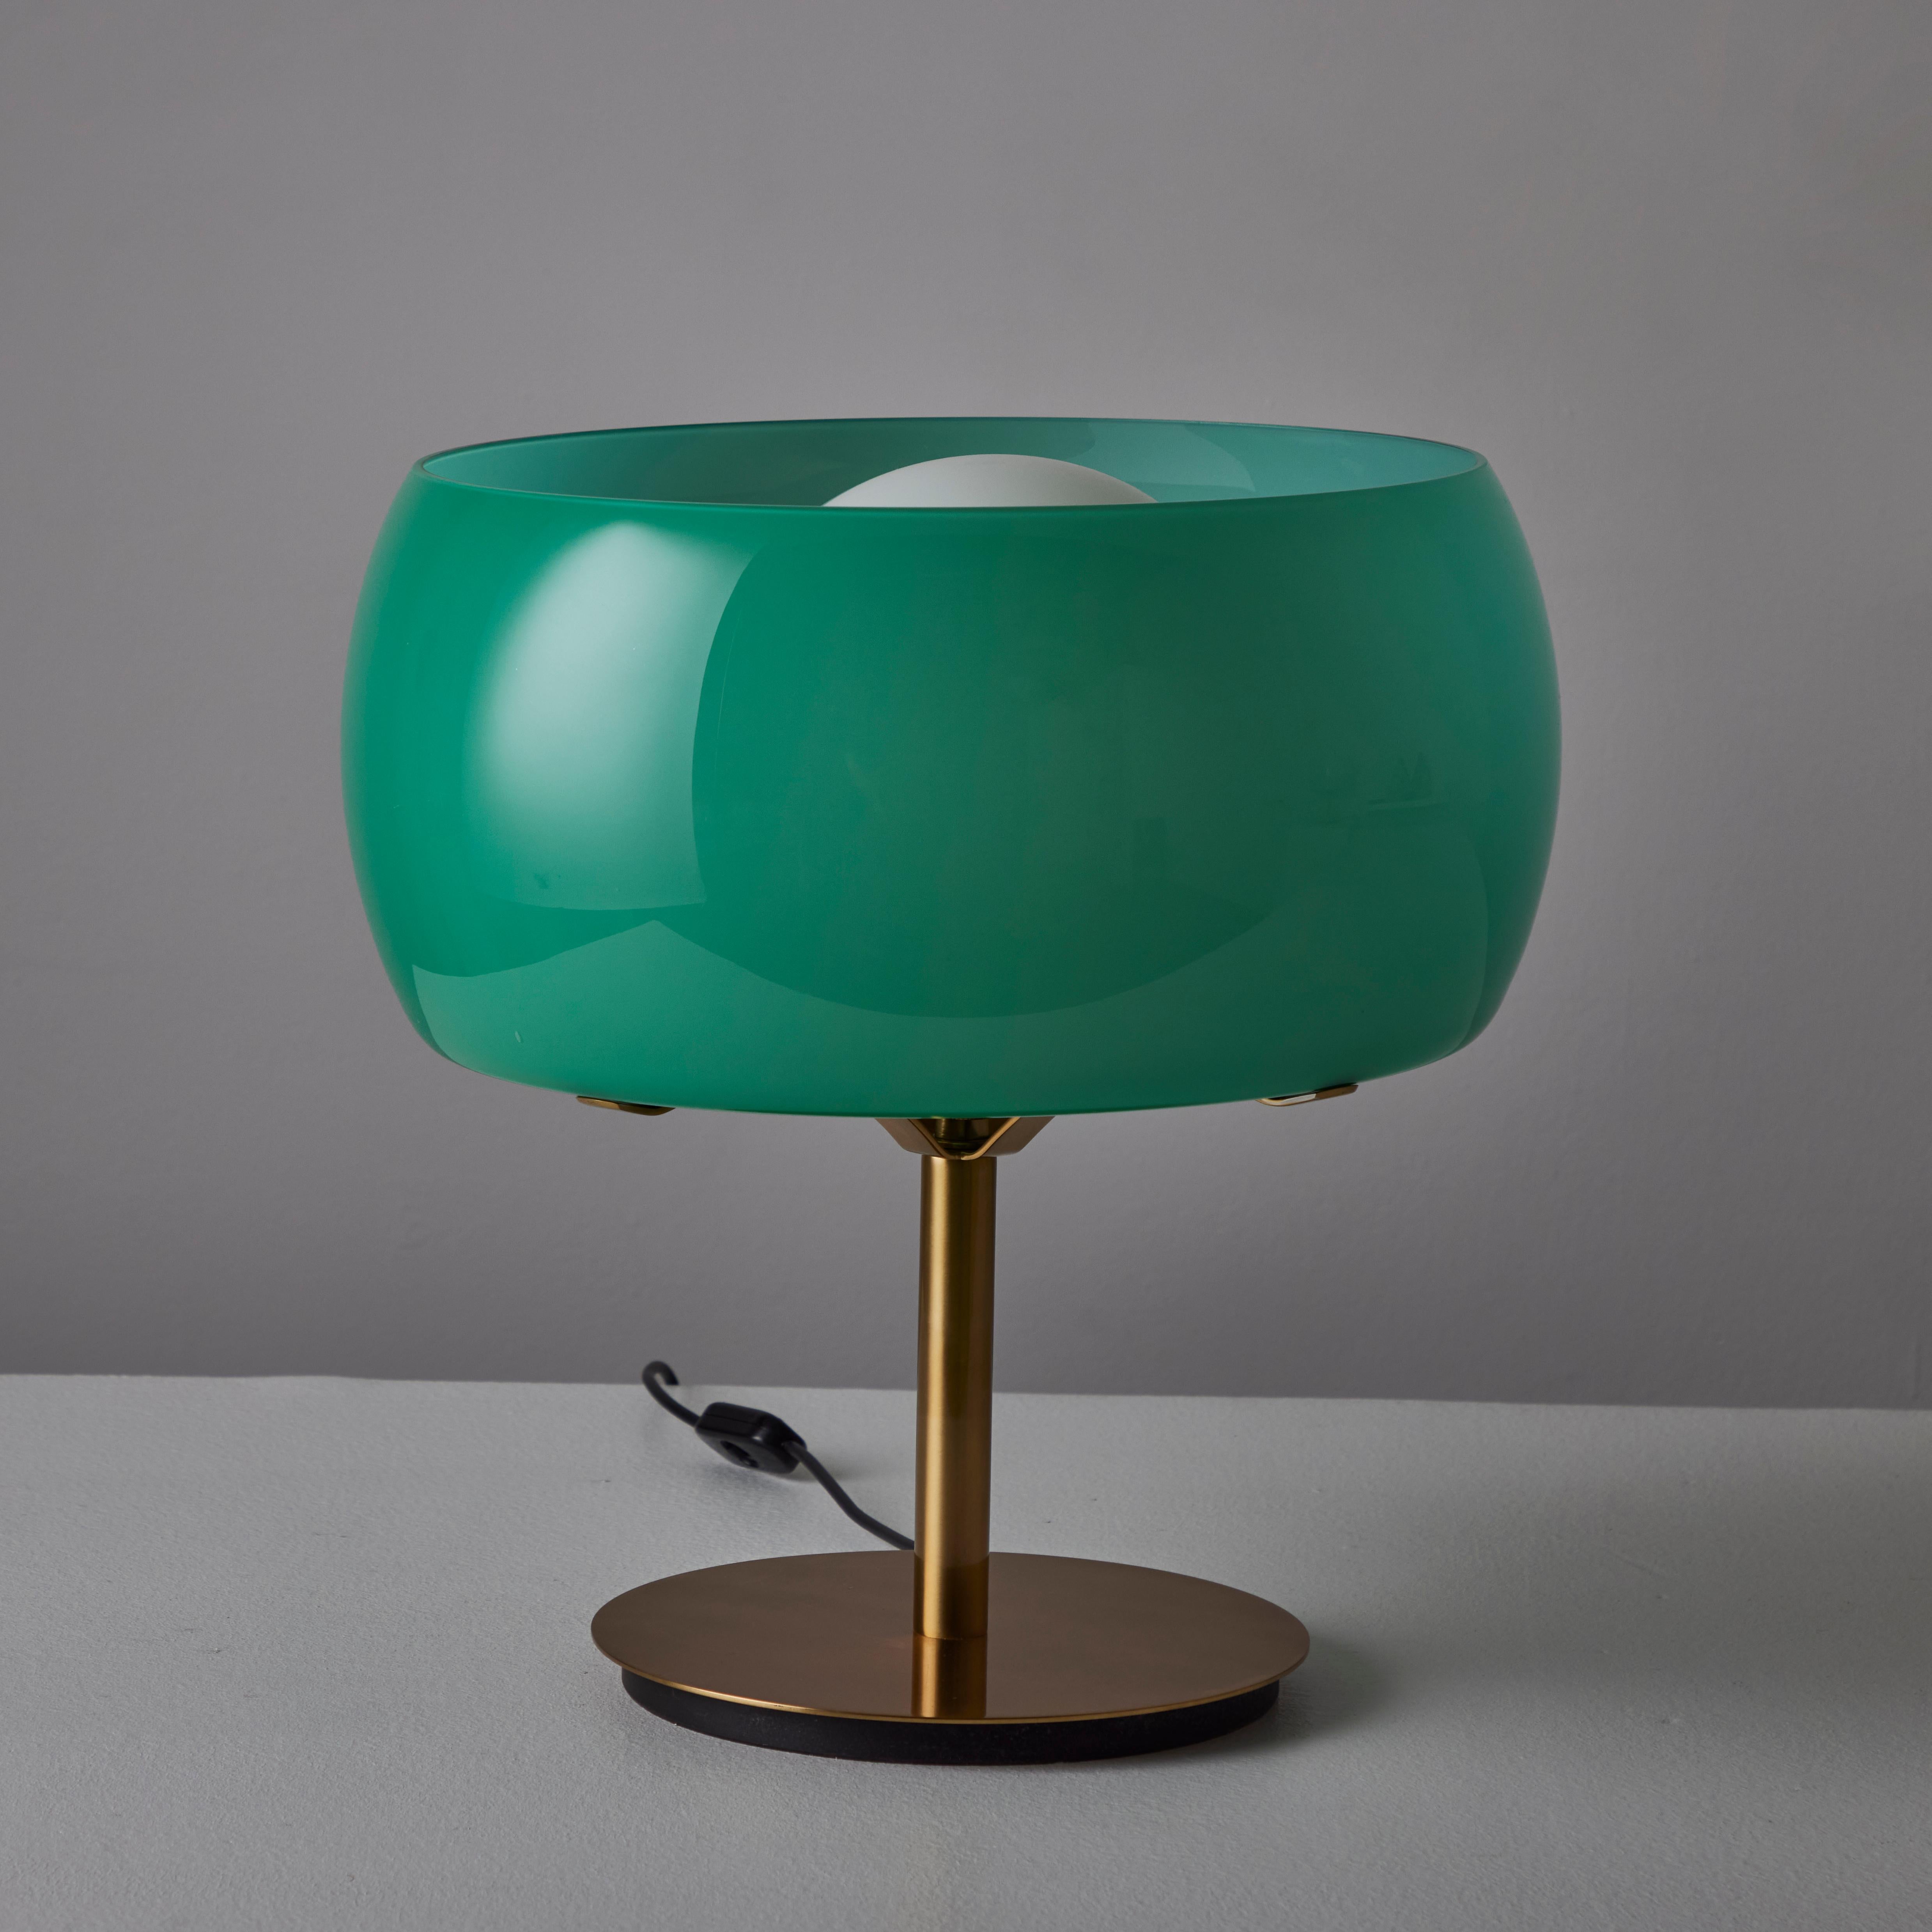 Rare pair of 'Erse' Table Lamp by Vico Magistretti for Artemide. Designed and manufactured in Italy, 1964. The base and stem of the lamp is constructed of polished brass. External orbital shade is made of teal colored glass which wraps around a